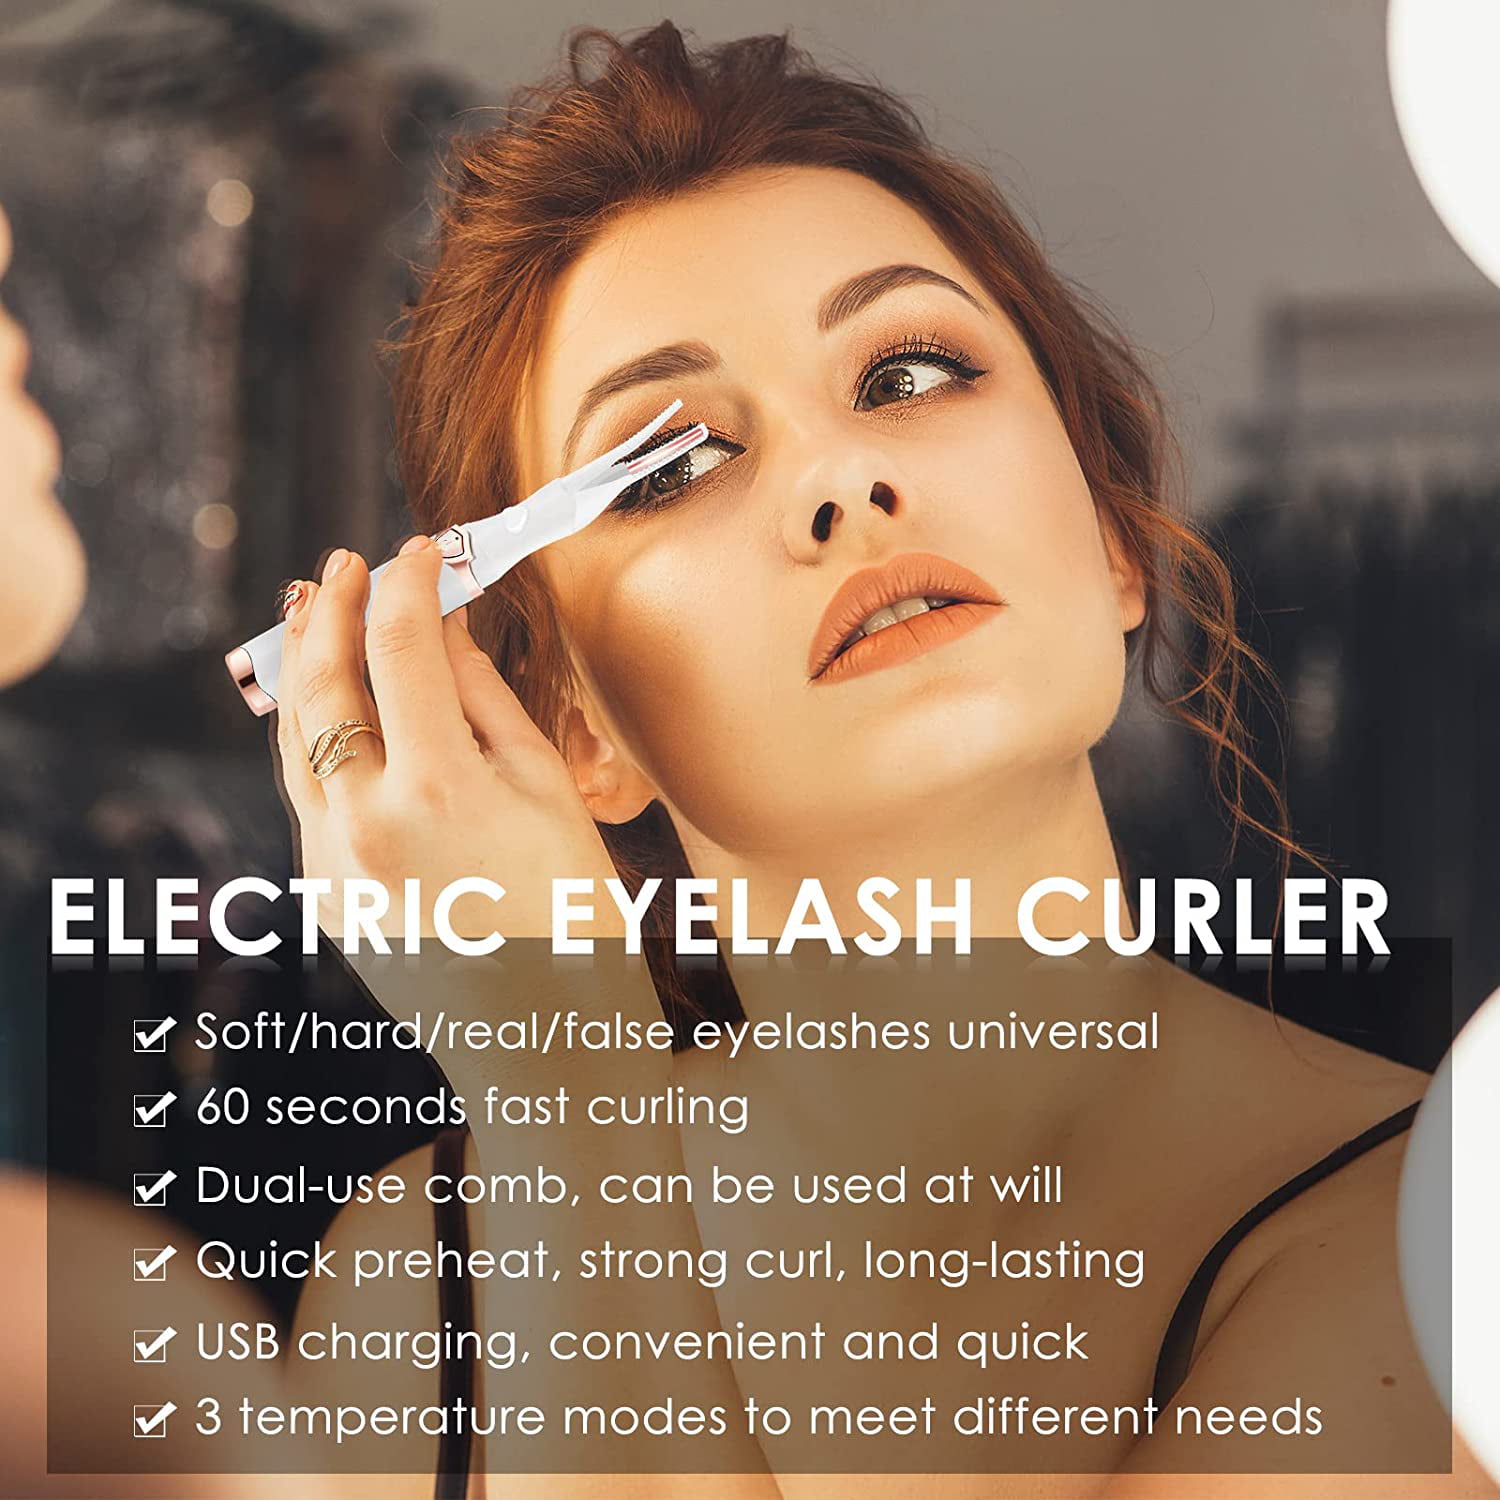 Heated Eyelash Curler by PEIPAI, Rechargeable Lash Curler with